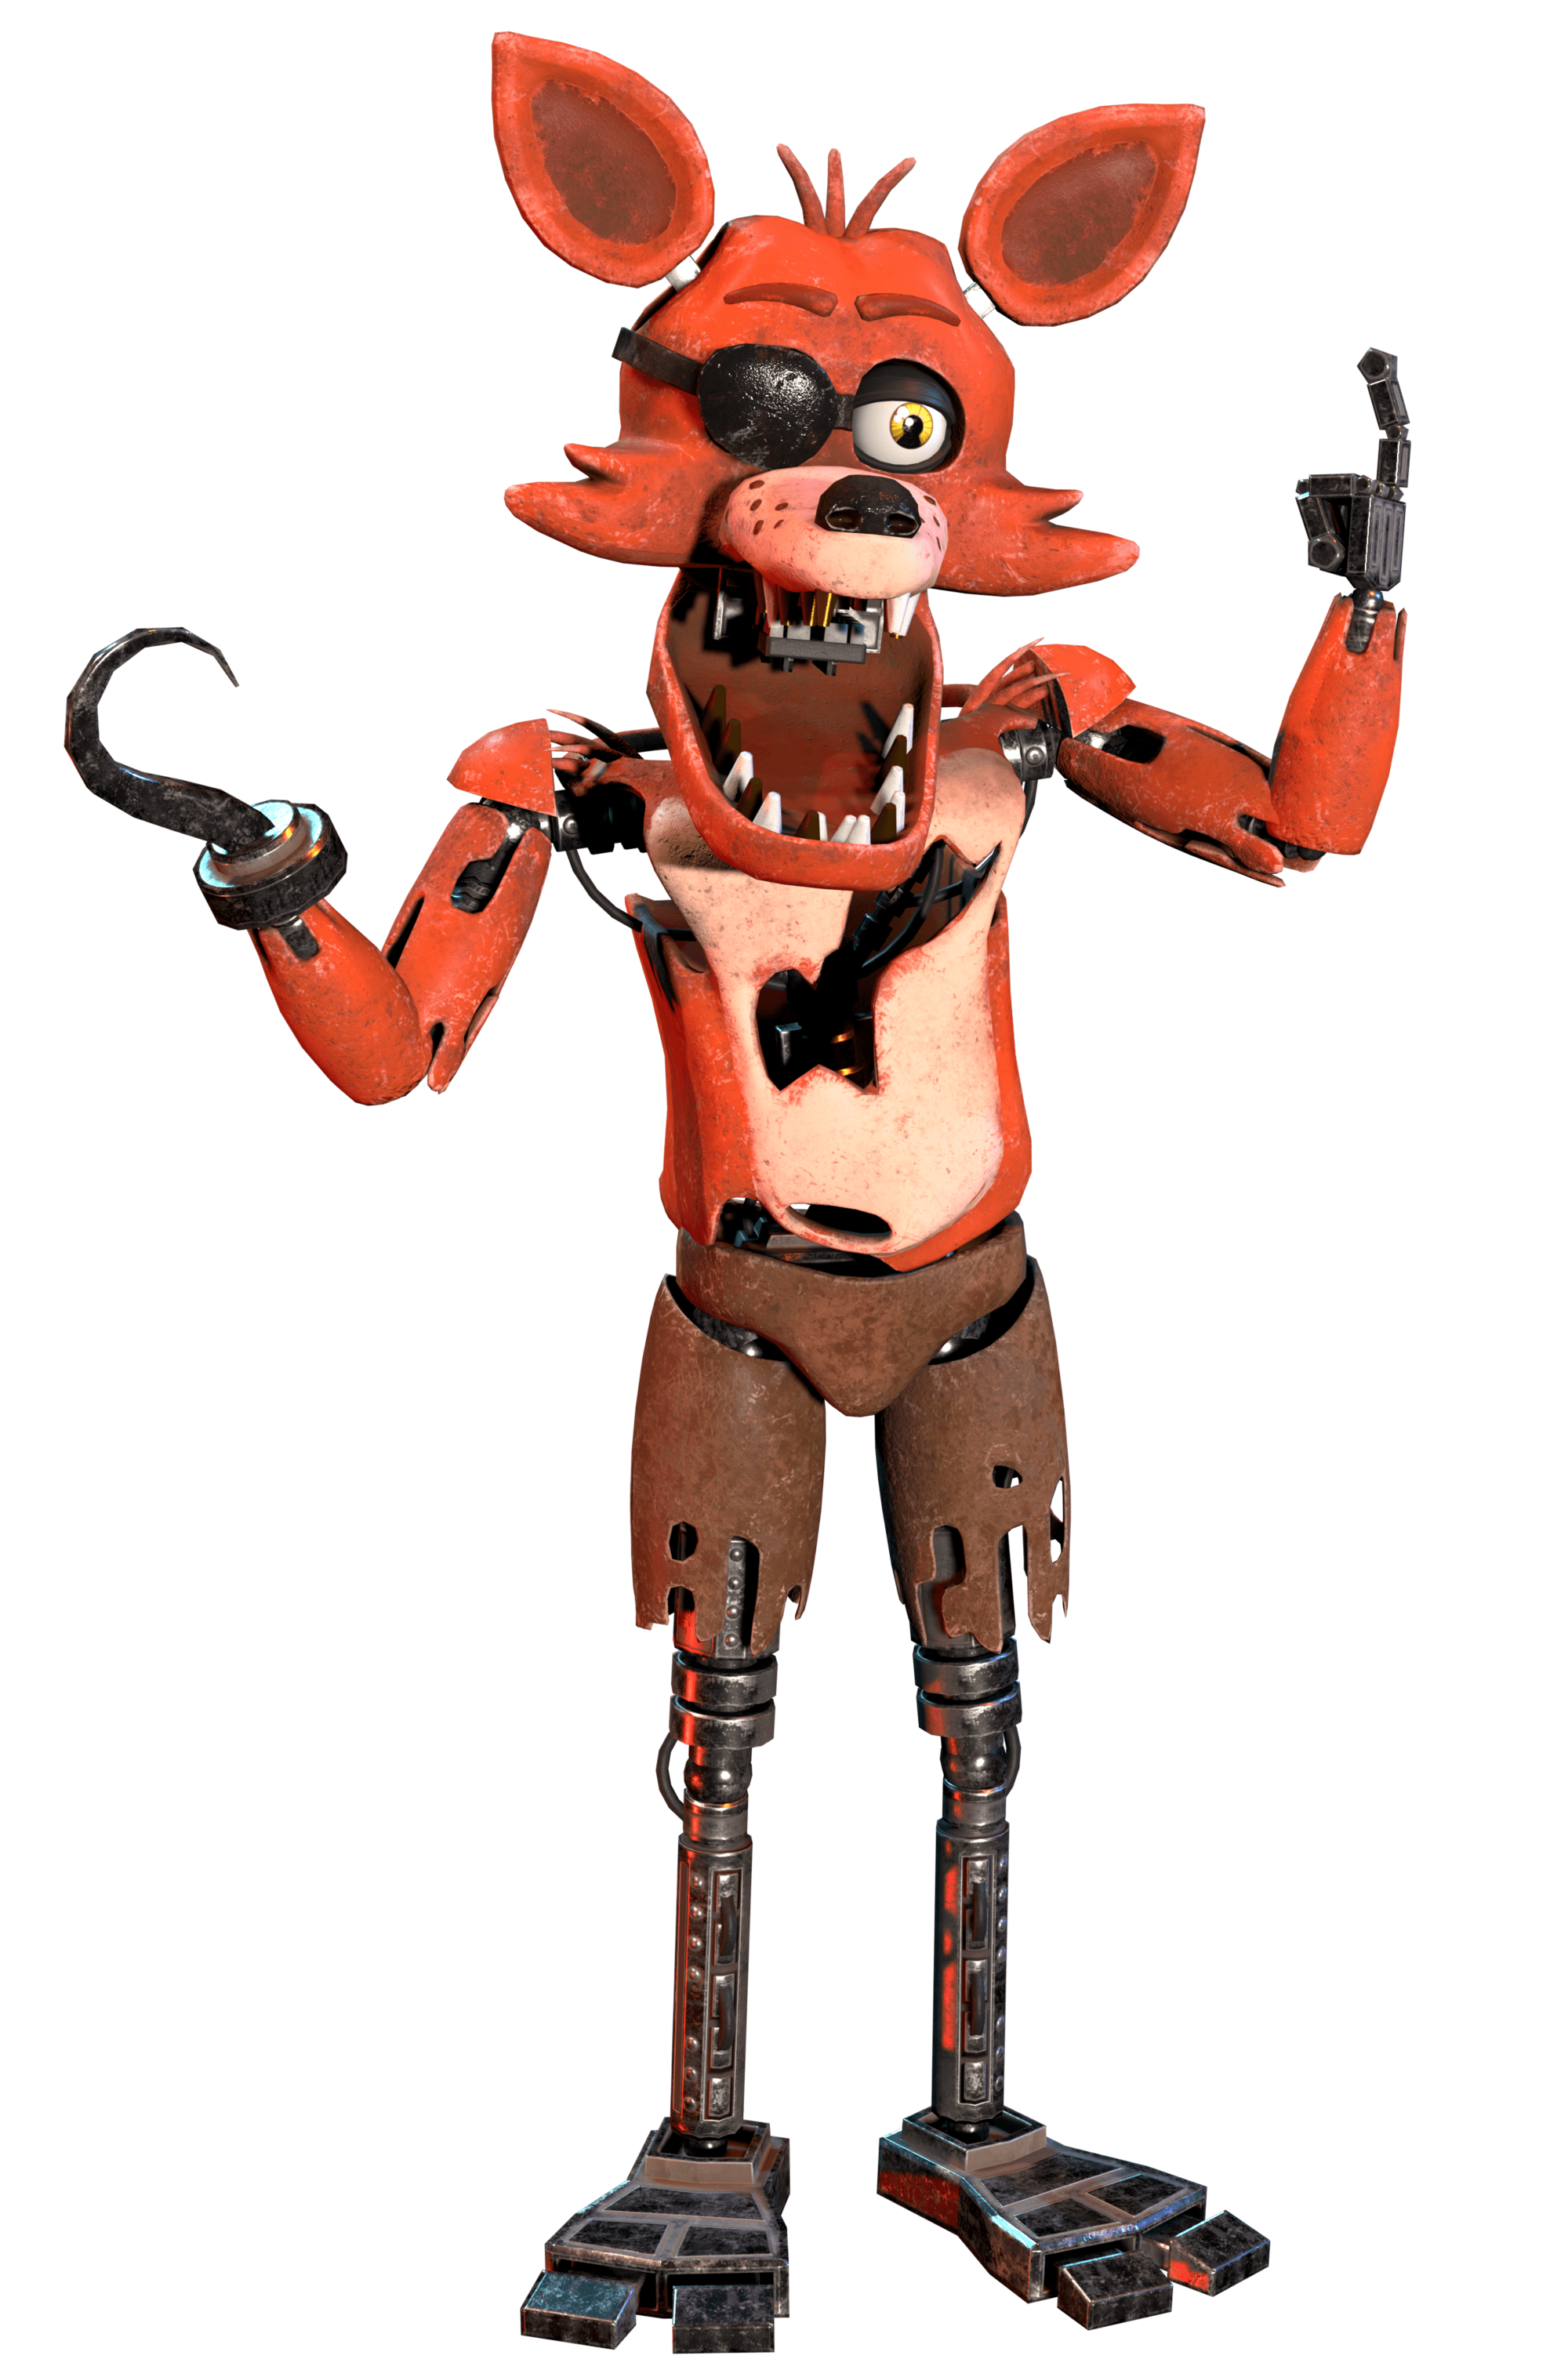 Byfranarving - Kigurumi Foxy The Pirate - Game Five Nigths at